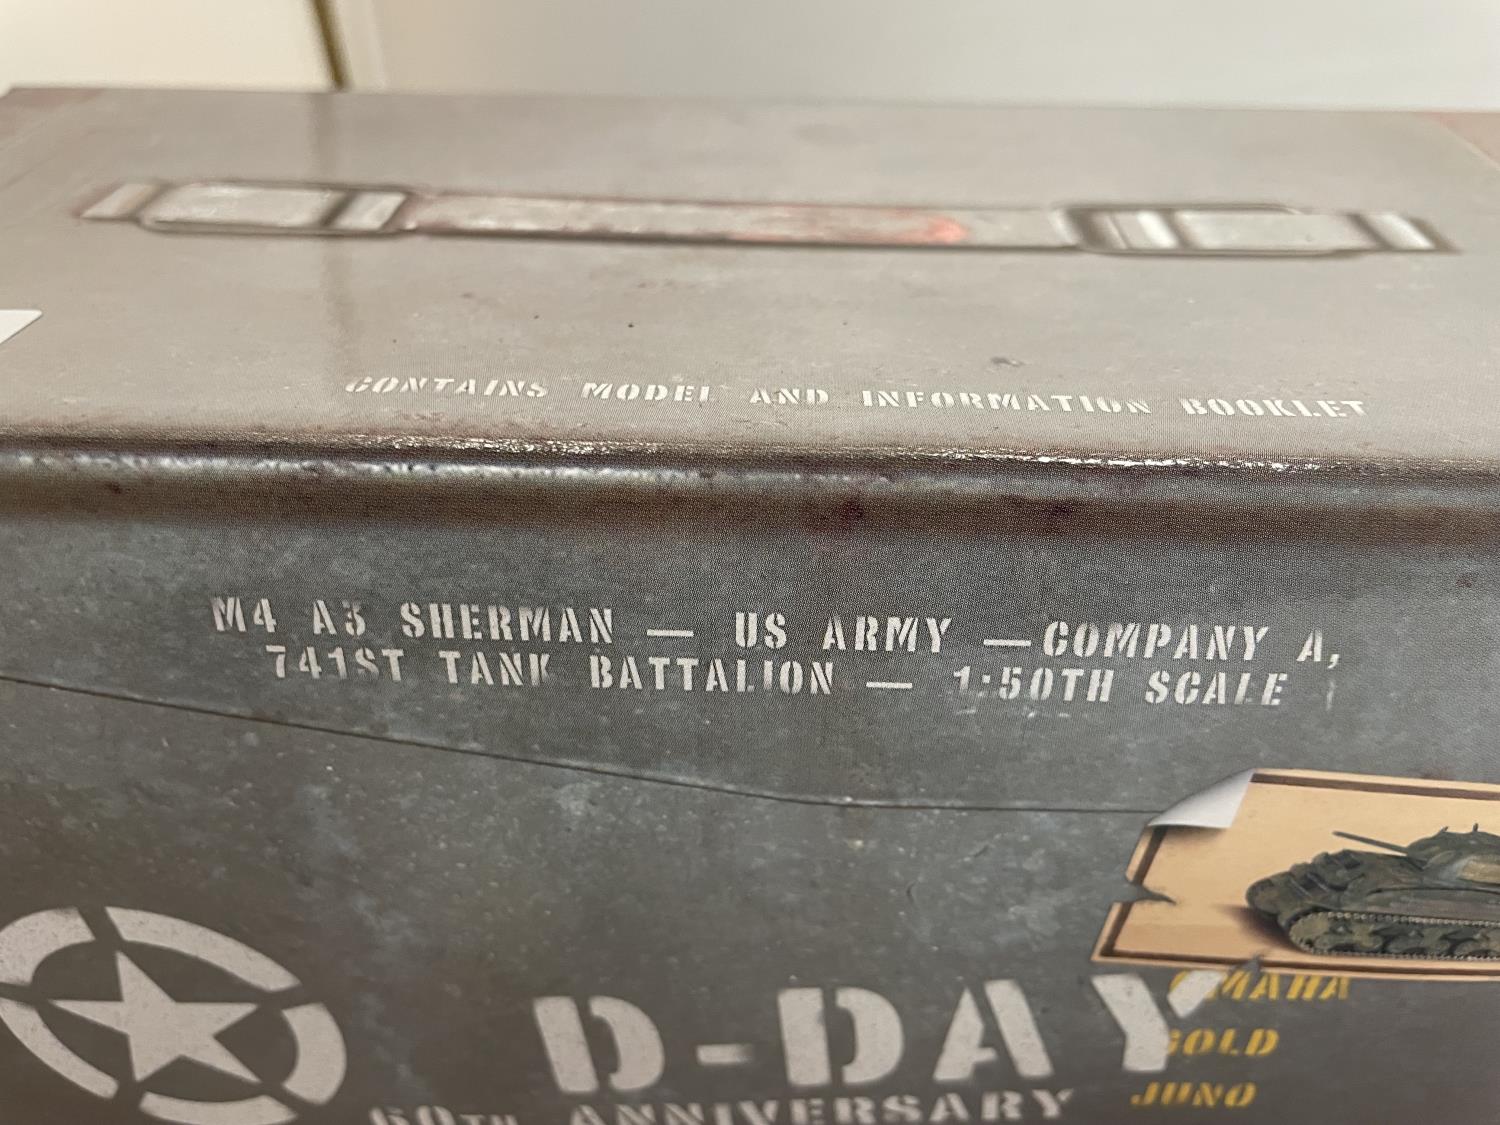 A BOXED CORGI MODEL SHERMAN TANK FROM THE D-DAY 60TH ANNIVERSARY RANGE - Image 3 of 3